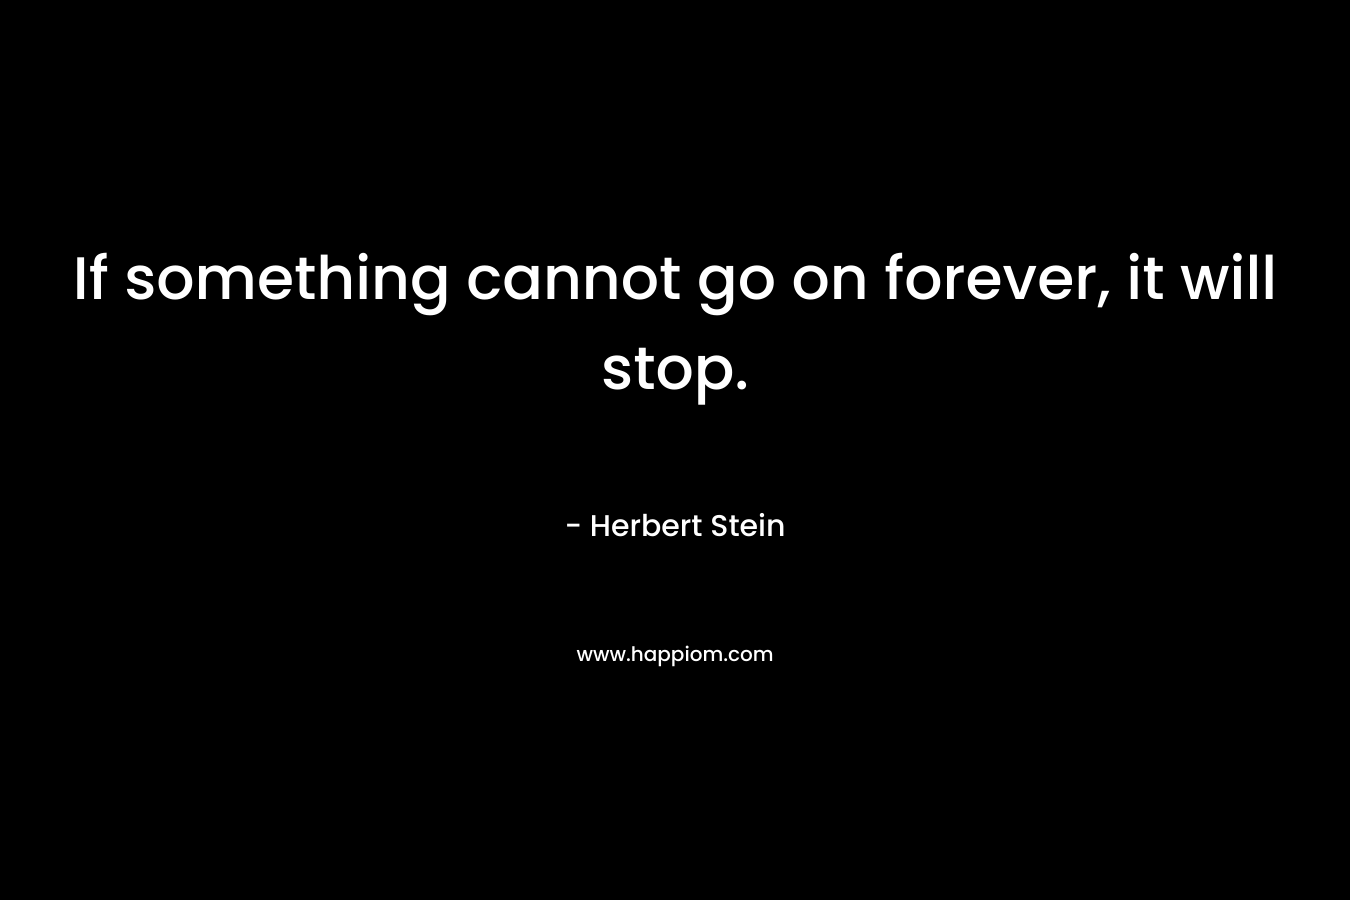 If something cannot go on forever, it will stop.